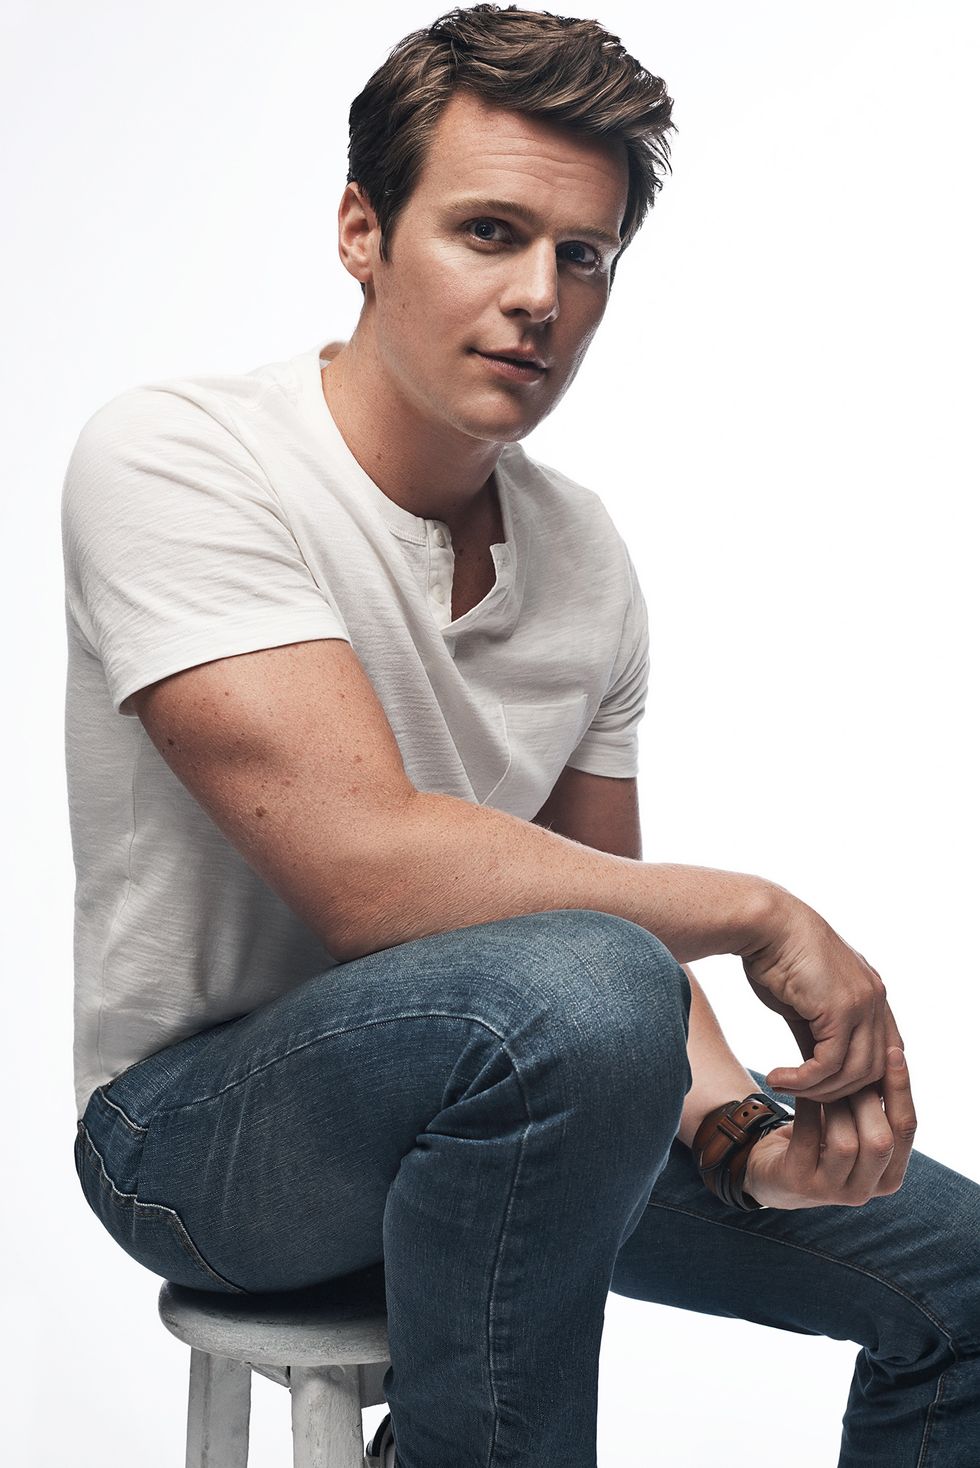 Sitting, Jeans, Cheek, Arm, Cool, Model, Neck, Muscle, Photo shoot, Photography, 